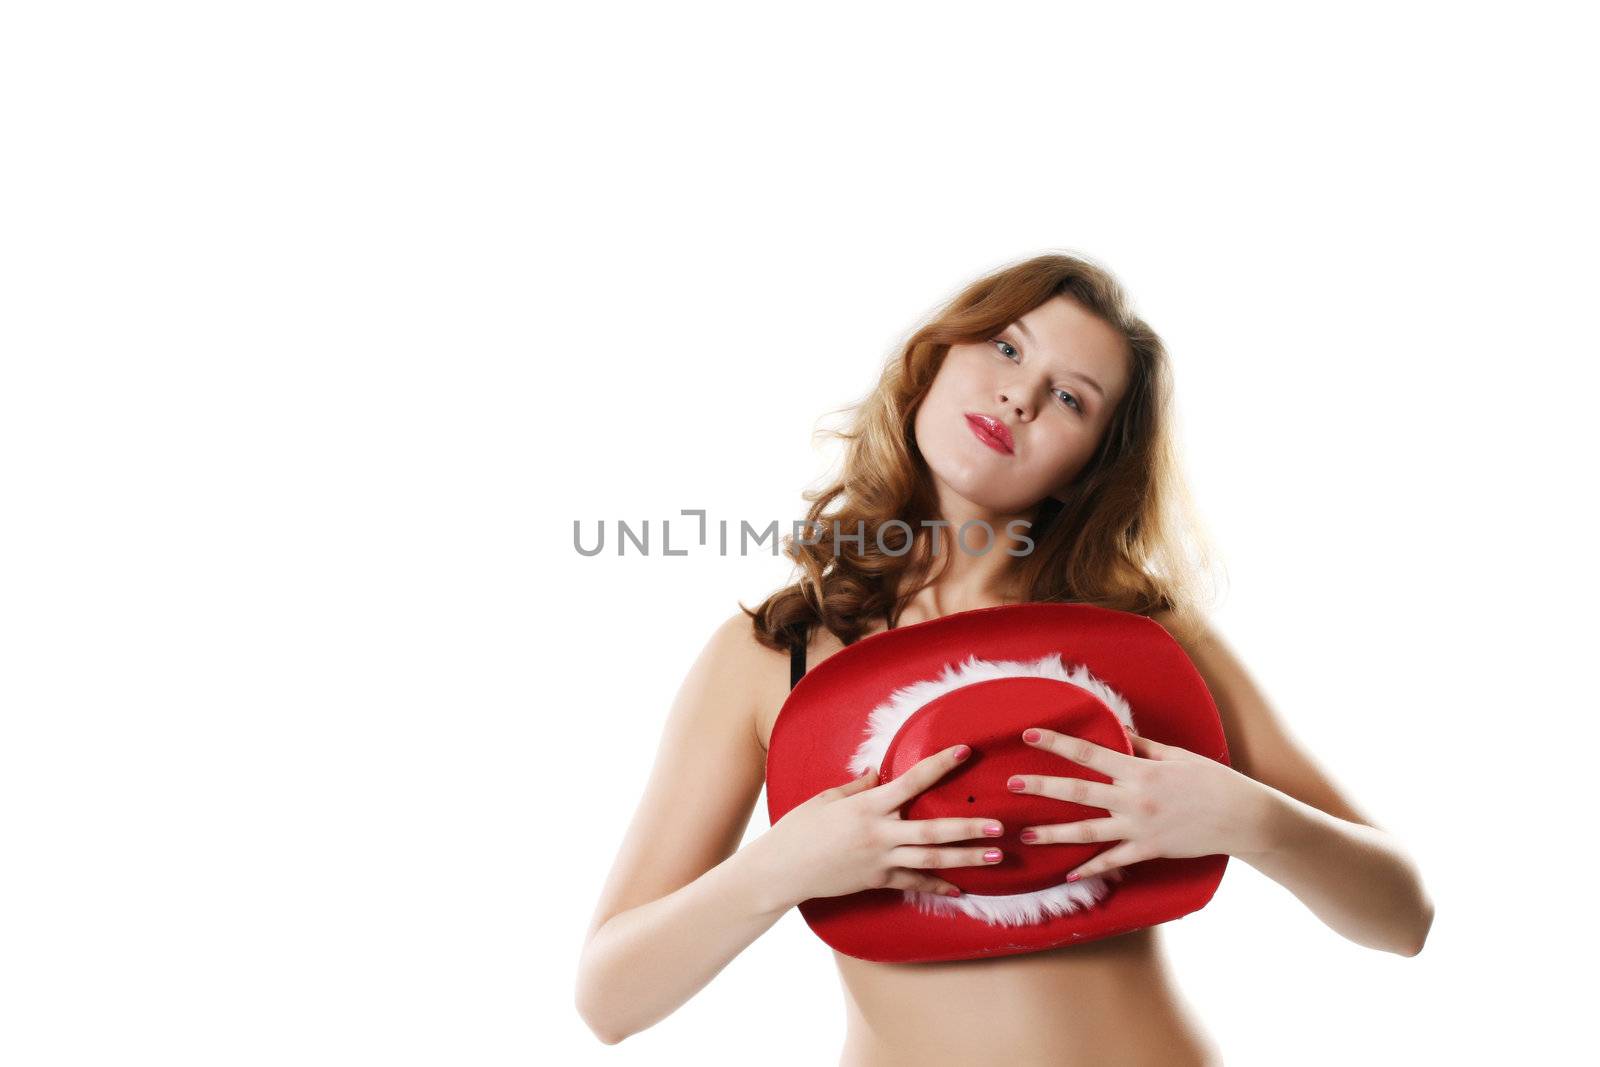 The sexual girl is covered with a red hat